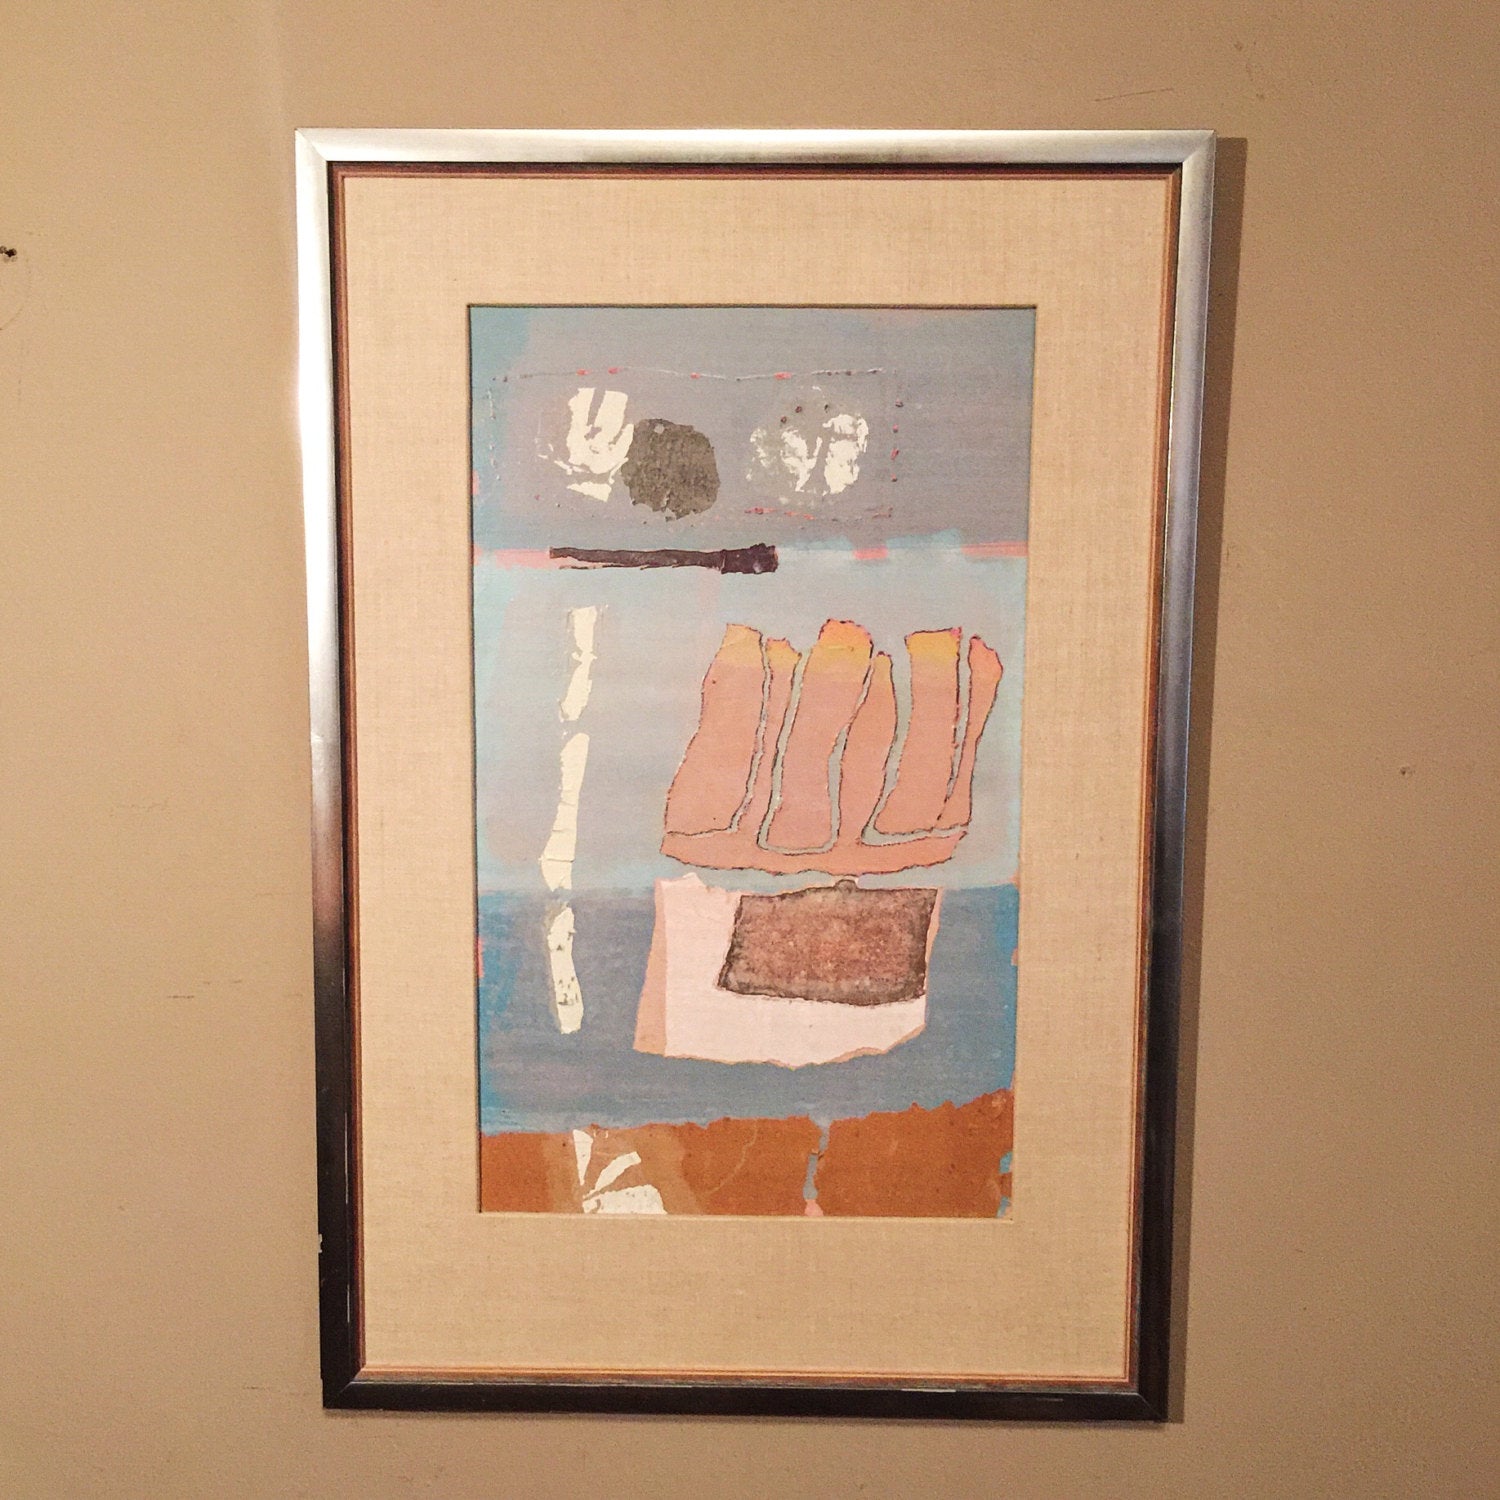 Fred Laros Collage Art Piece - 1970s - Kraushaar Galleries Provenance - New York City - Abstract - Modernism - Listed Artist - Framed